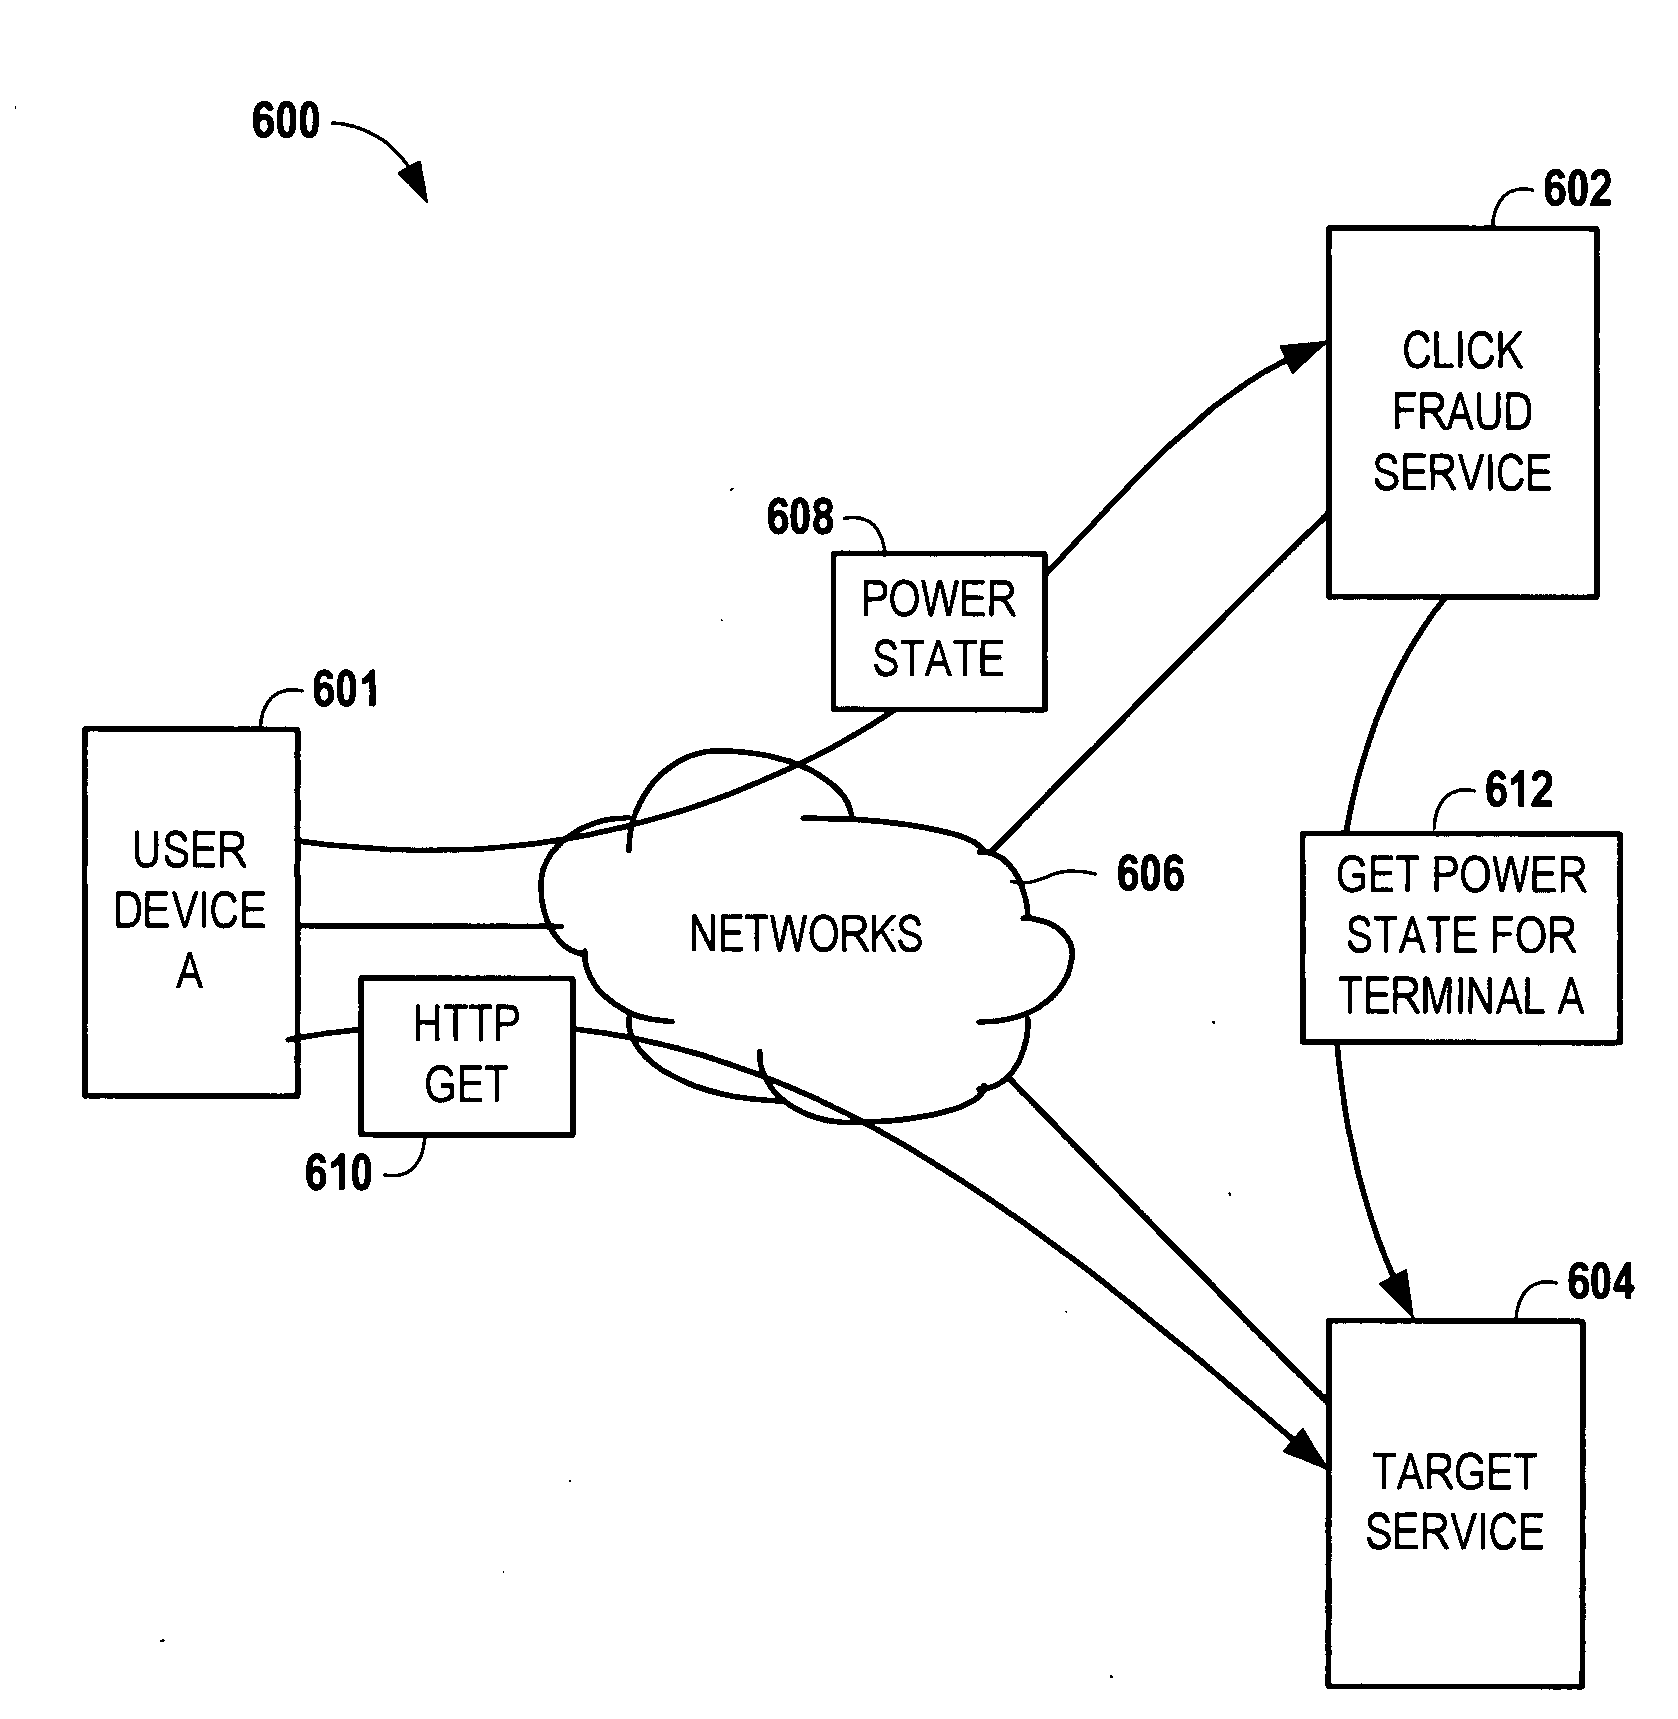 Method and apparatus for detecting click fraud